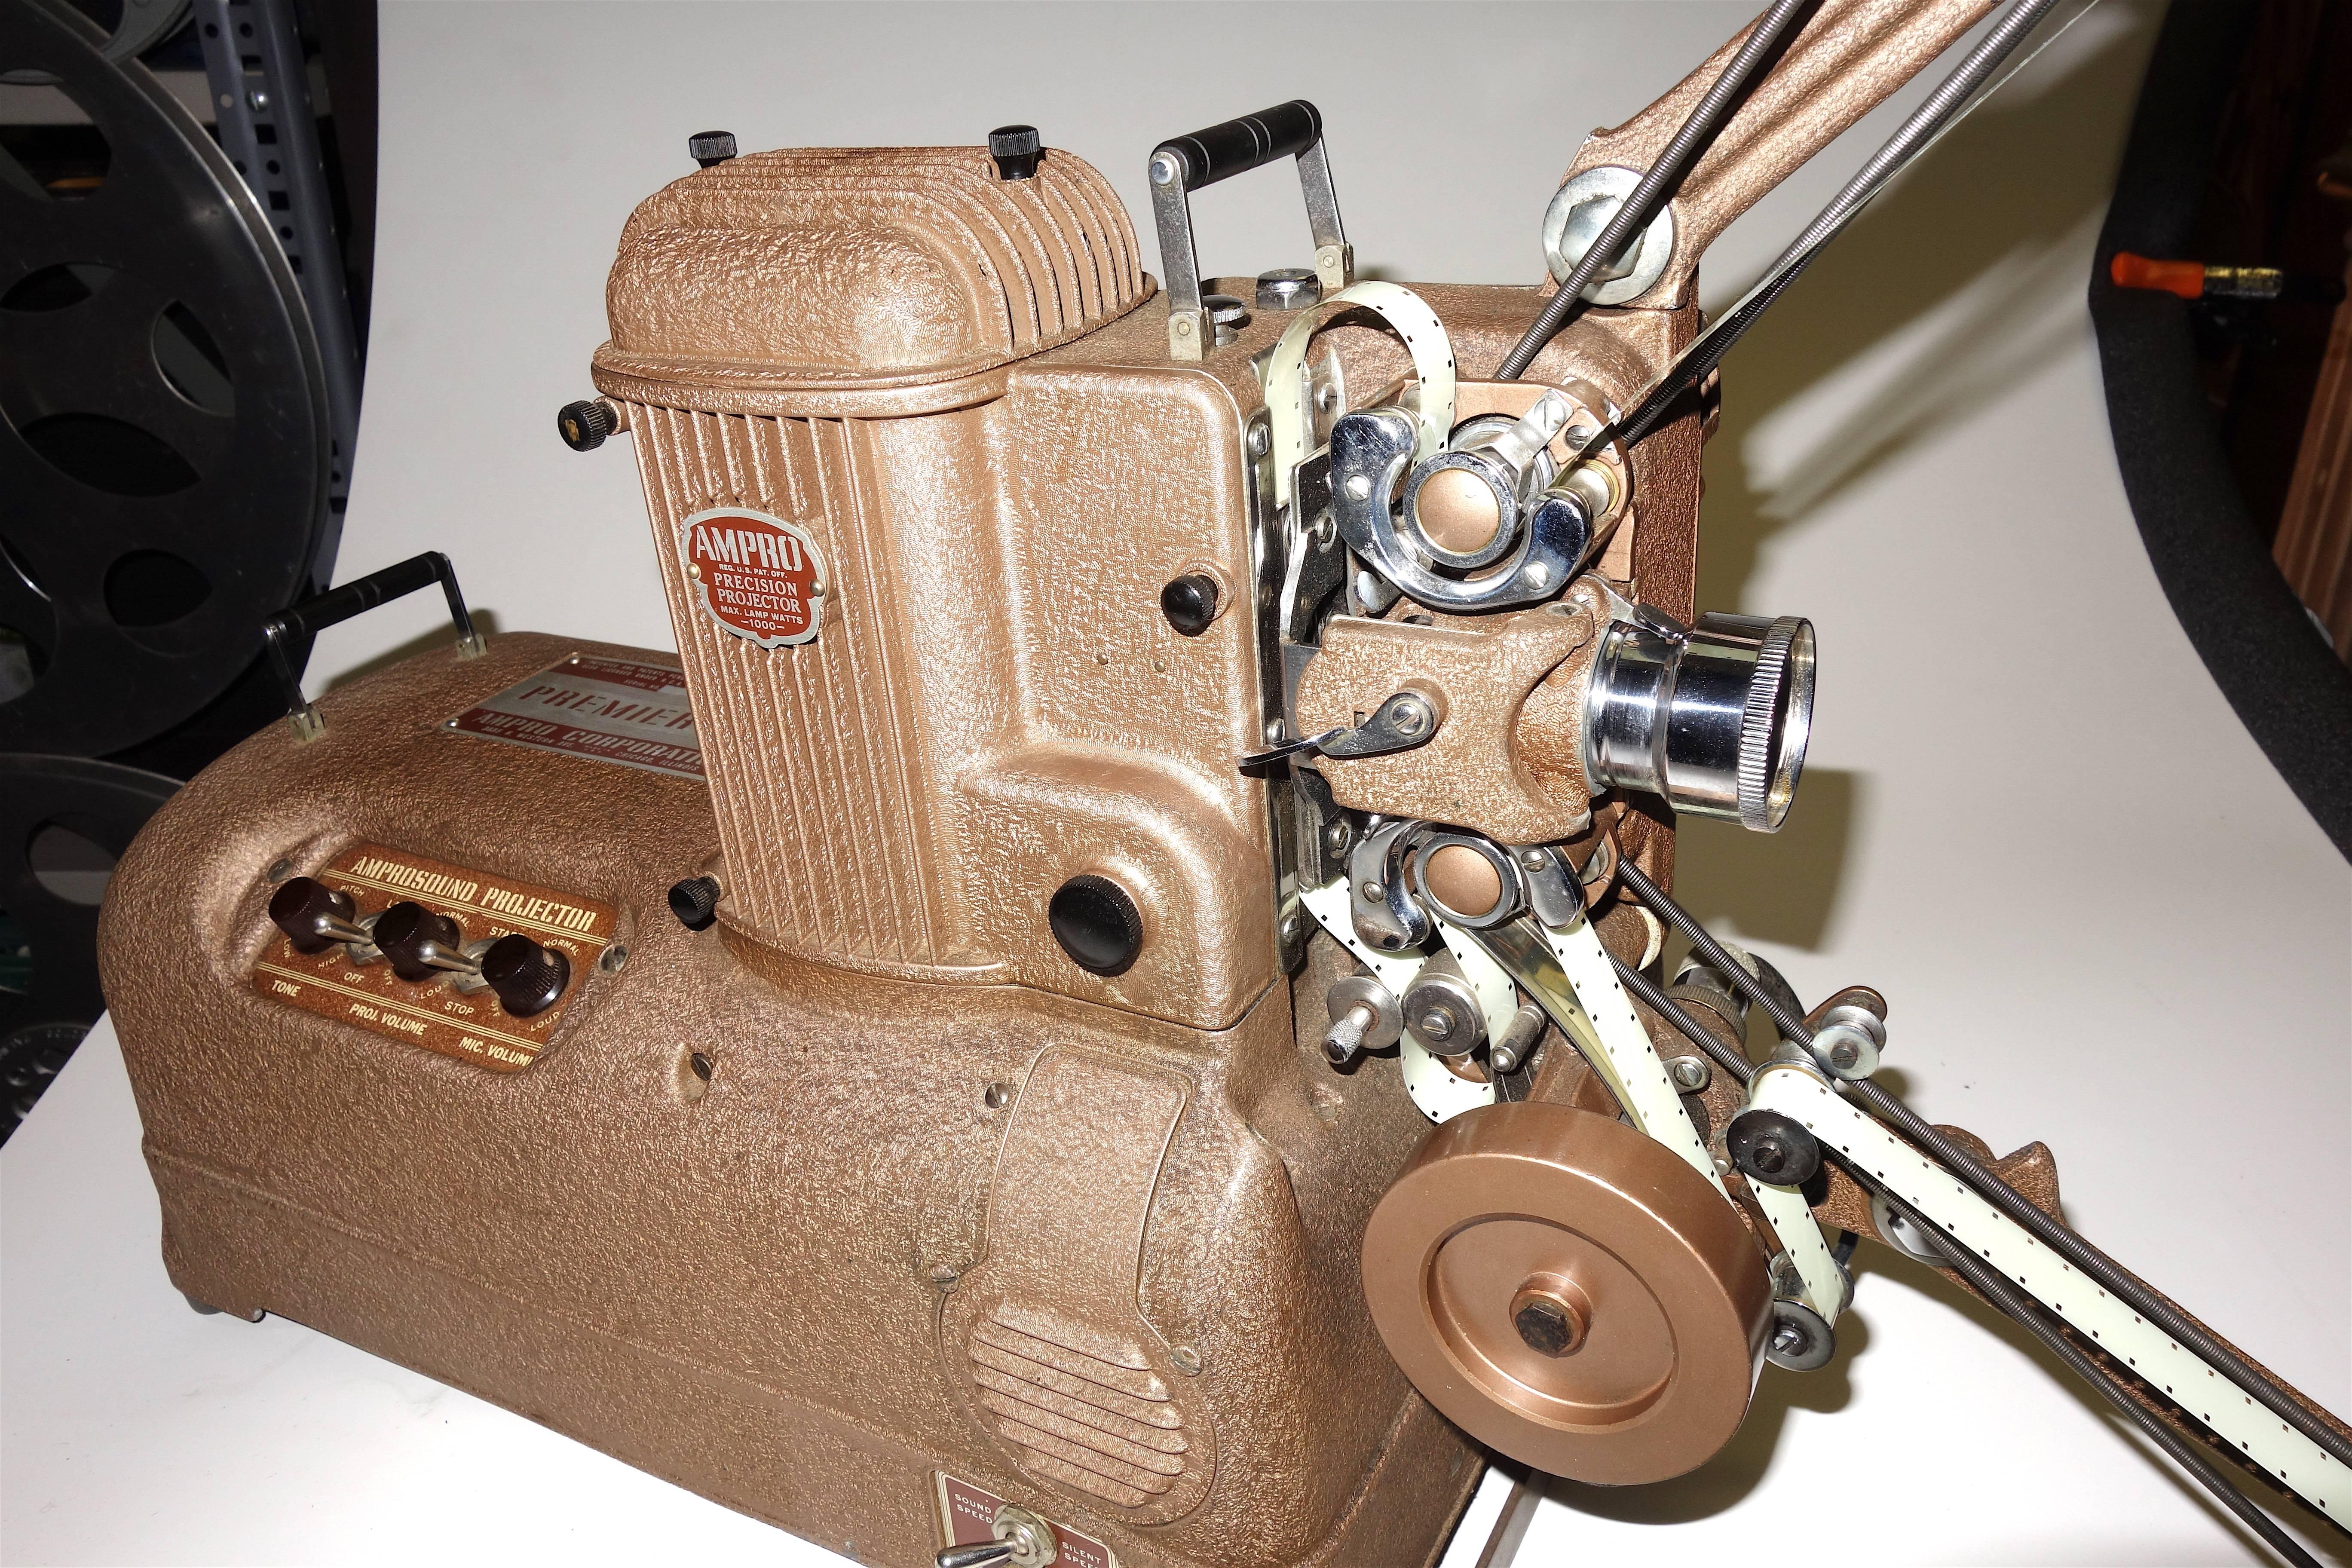 Note: 
This antique may qualify for our Gallery Wide Extra 10-25% Off Sale, 
Going on now.

Submitted for your approval is this circa 1940s, 16mm AMPRO Motion Picture Movie Projector in absolutely pristine condition. Offered as a wonderful Art Deco